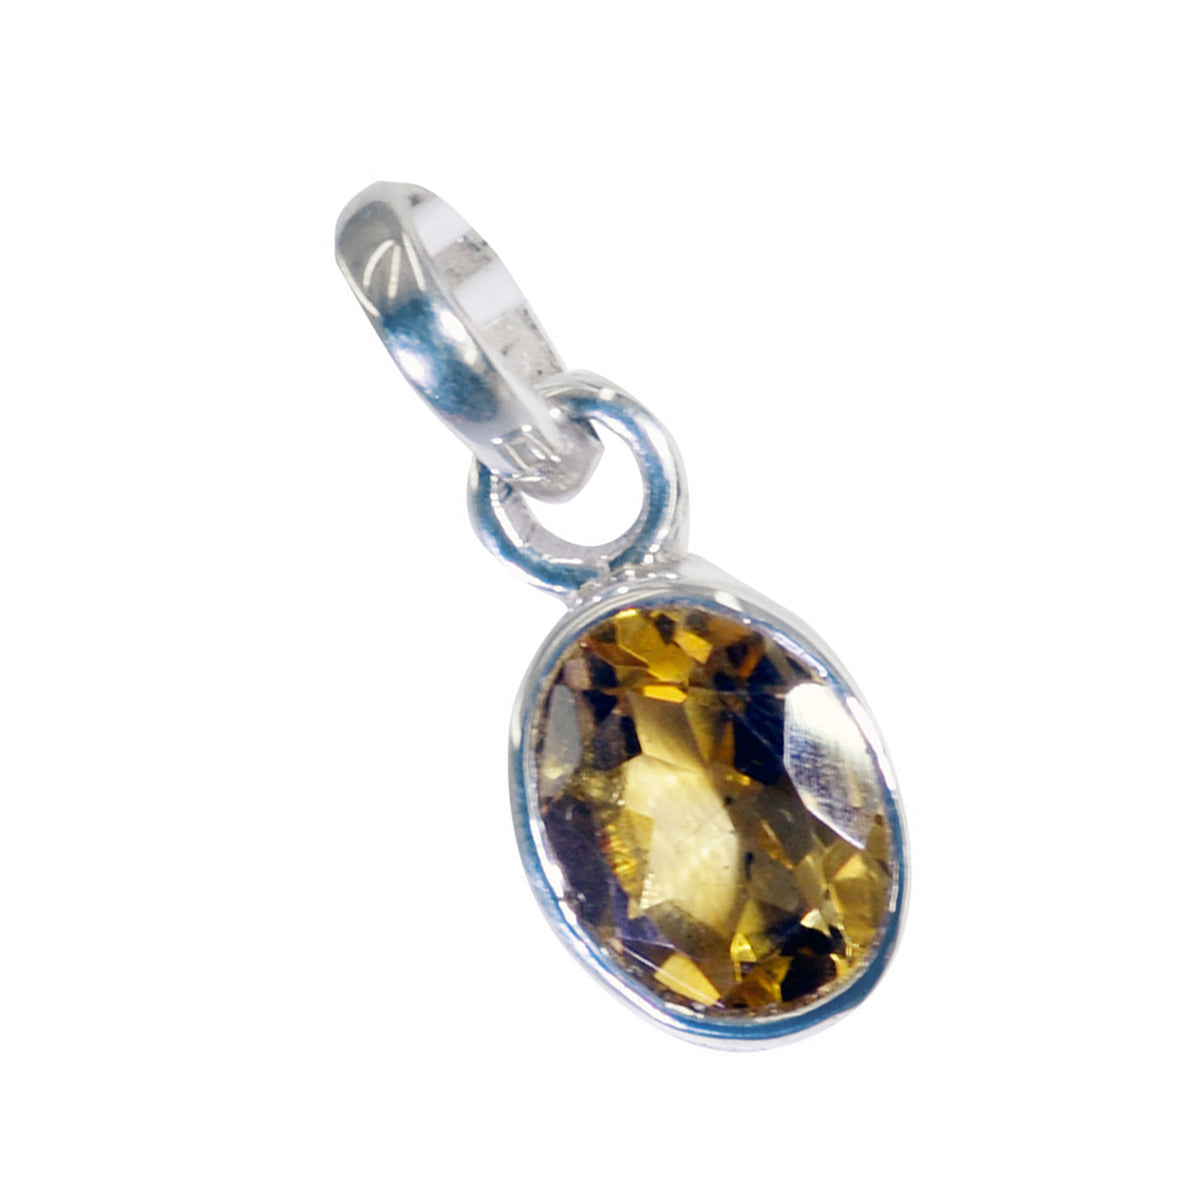 Riyo Bewitching Gemstone Oval Faceted Yellow Citrine 954 Sterling Silver Pendant Gift For Good Friday